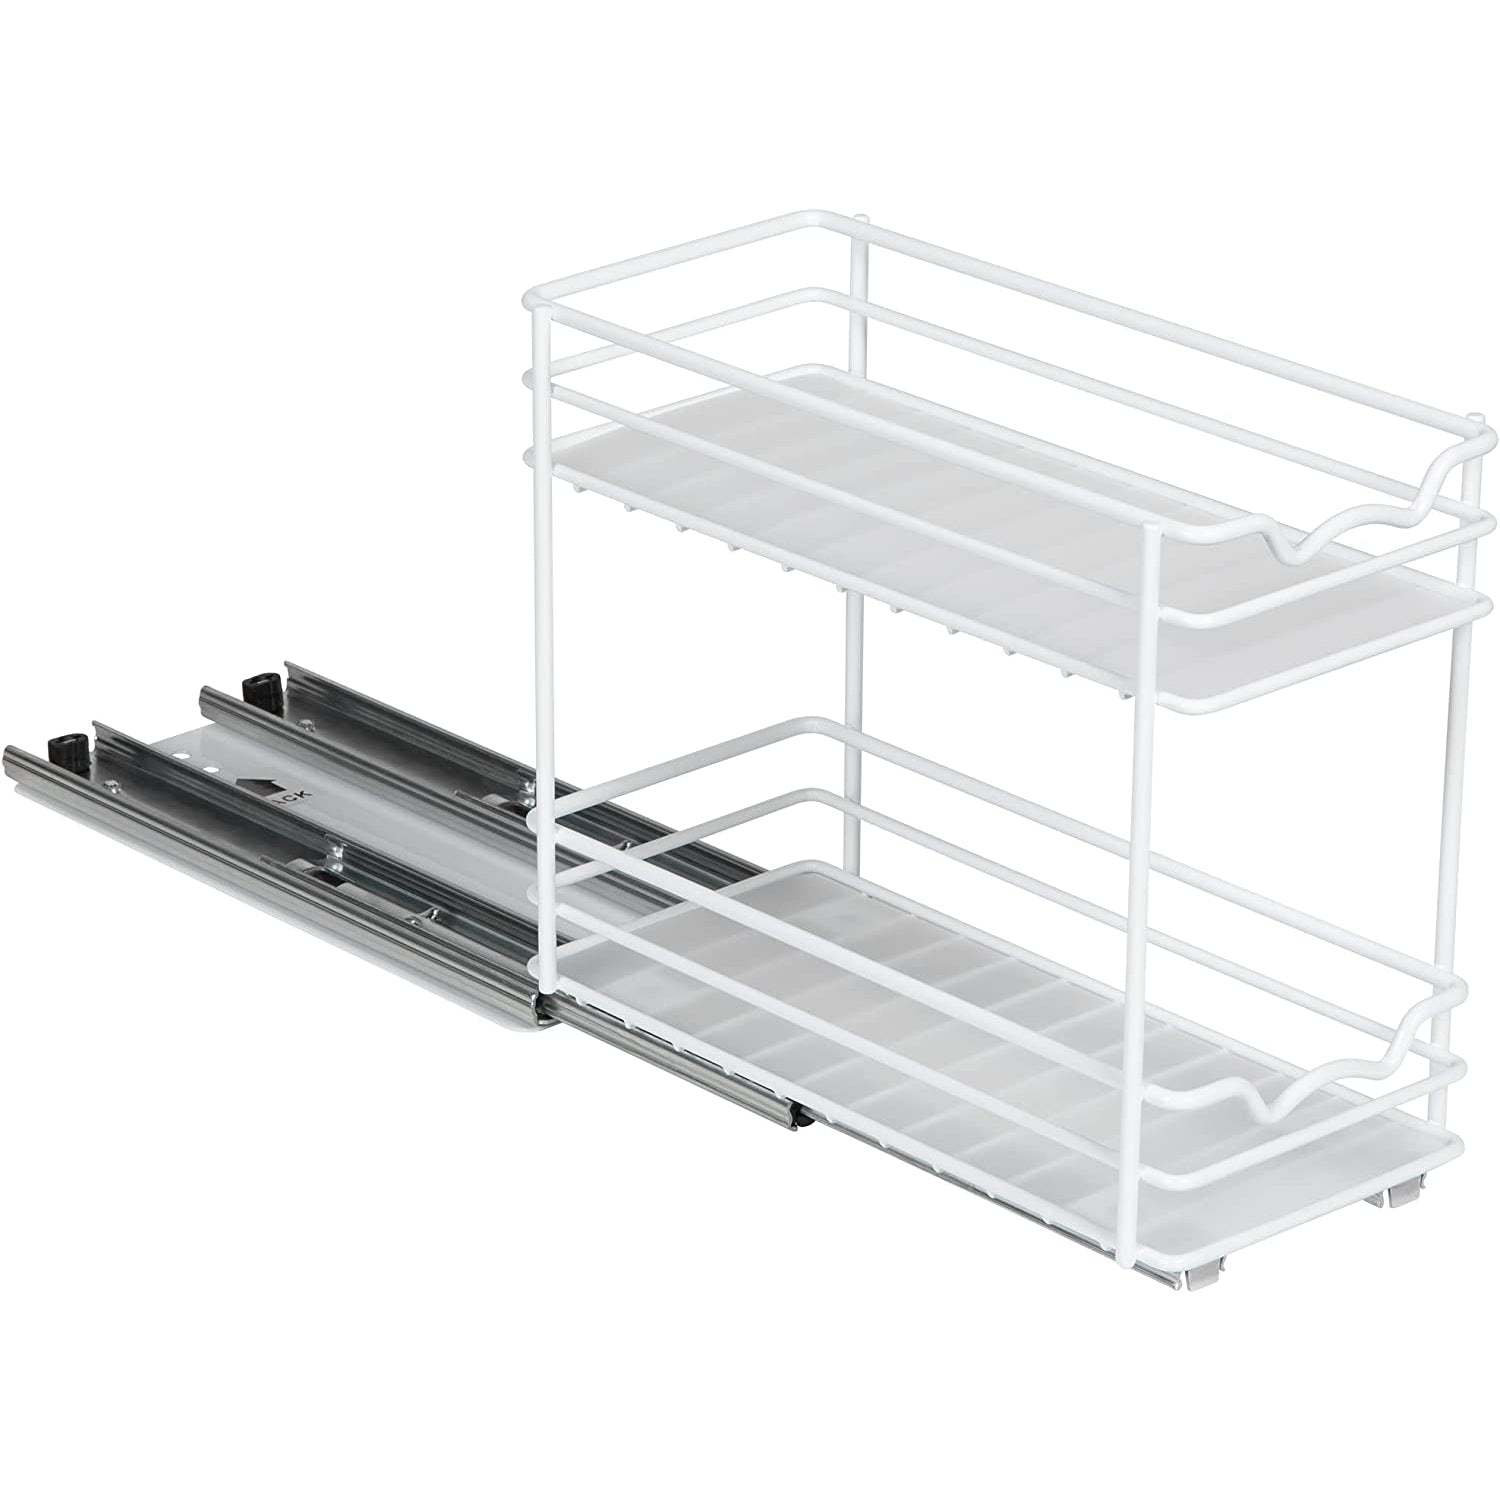 Pull Out Spice Rack Organizer for Cabinet, Heavy Duty-5 Year Limited Warranty- Slide Out Double Rack 8-3/8Wx10-3/8Dx8-7/8 H for Upper Kitchen